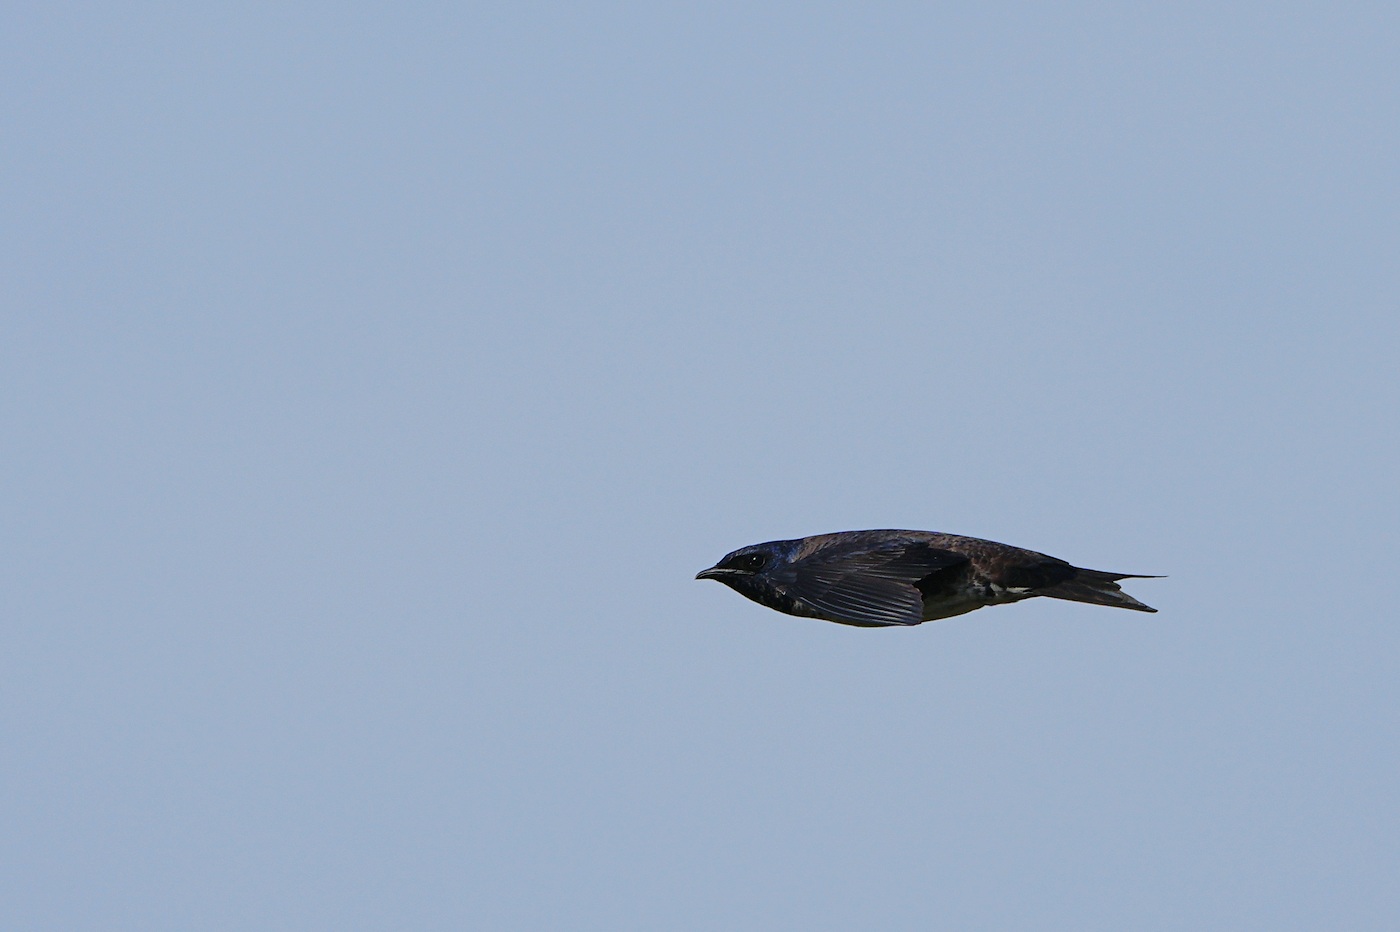 Purple martin flying like a cruise missile